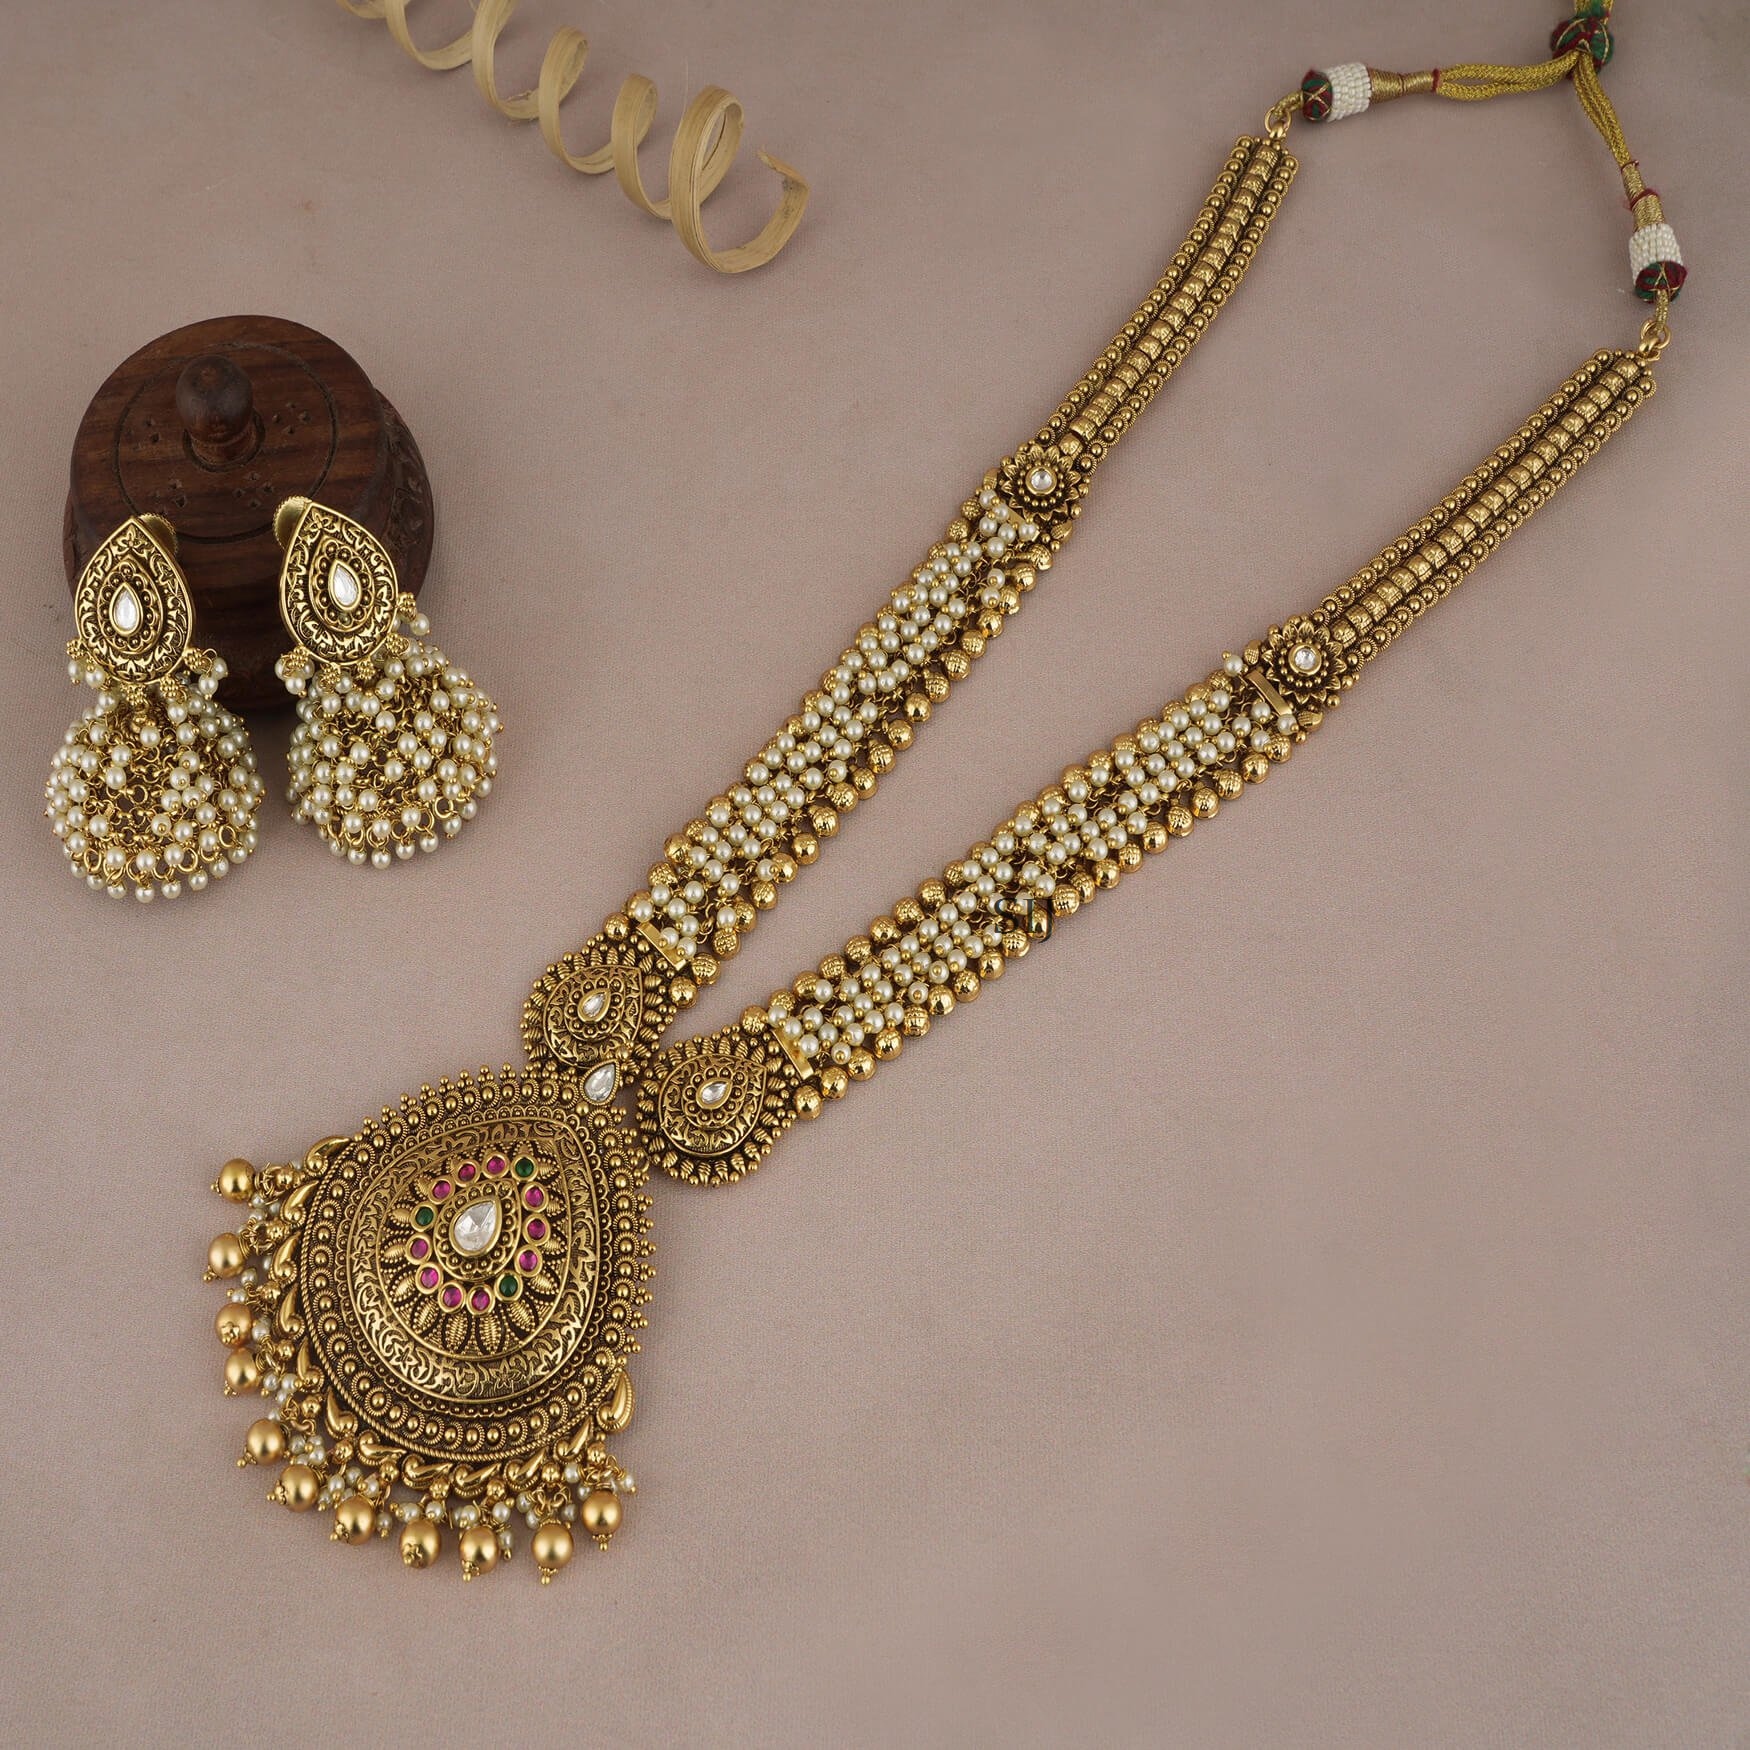 Alluring Antique Gold Finish Pearl Necklace Set